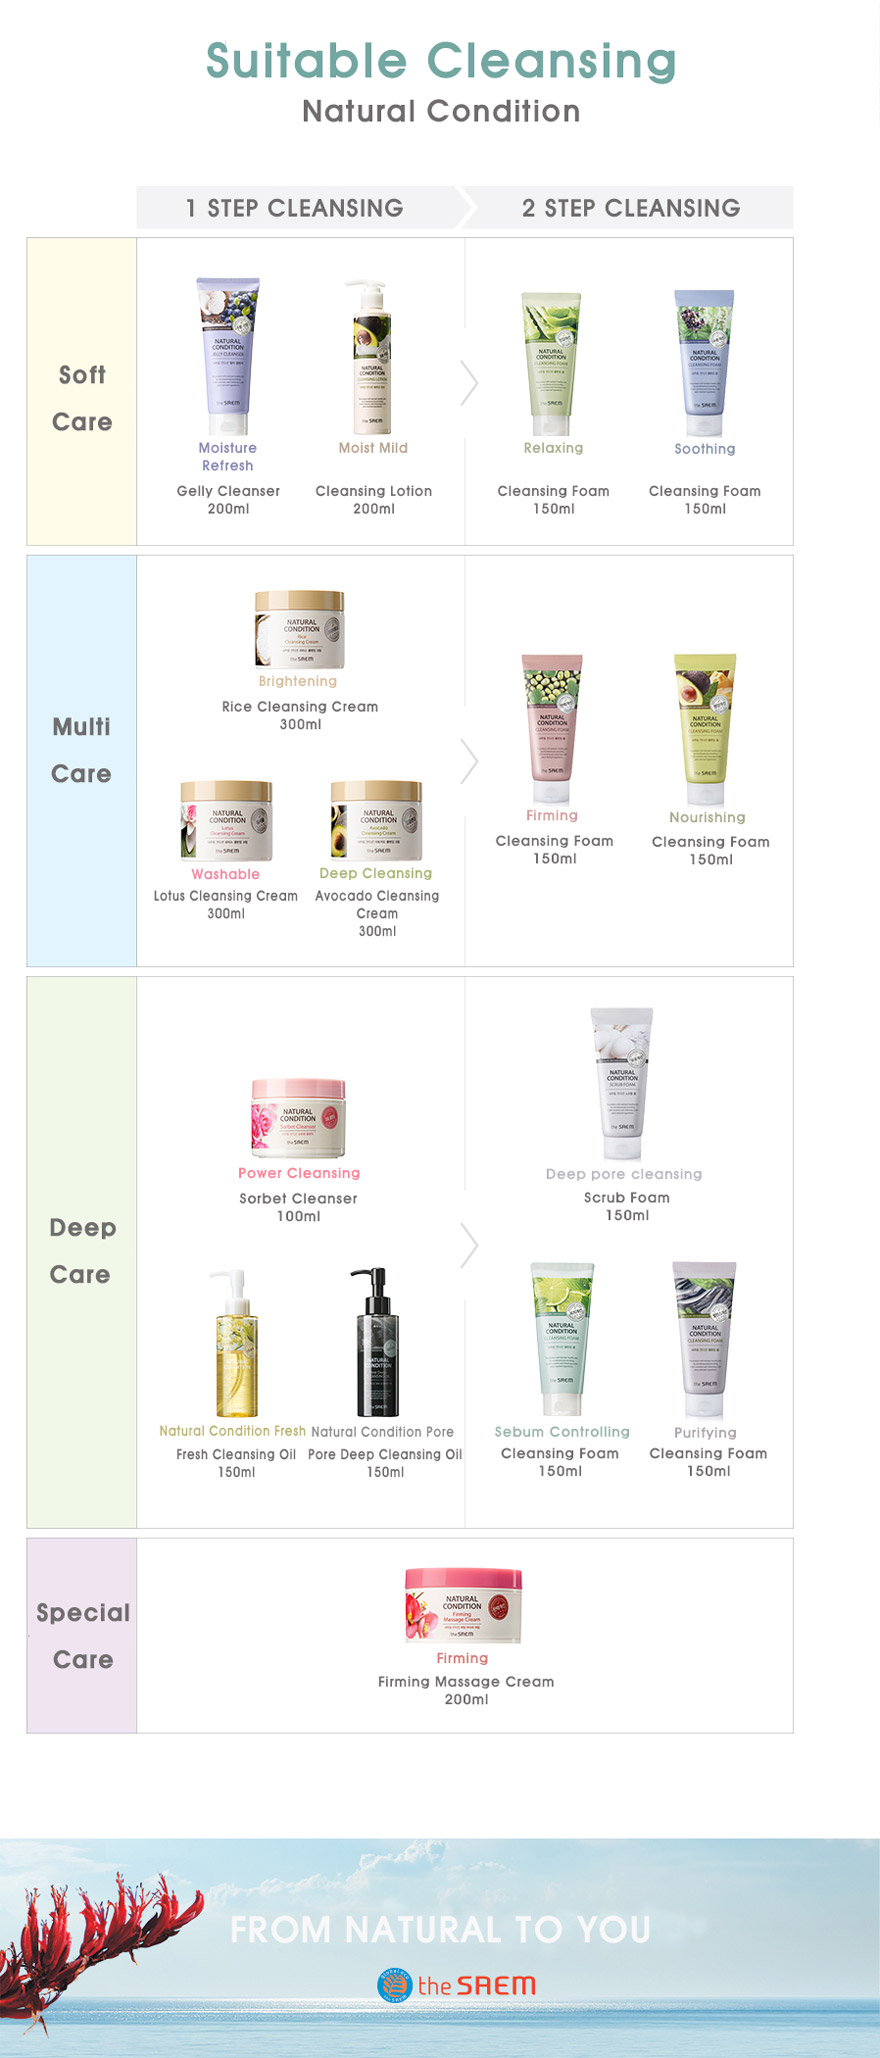 [The saem] Natural Condition Cleansing Scrub Foam #Soothing Cleansing 150ml